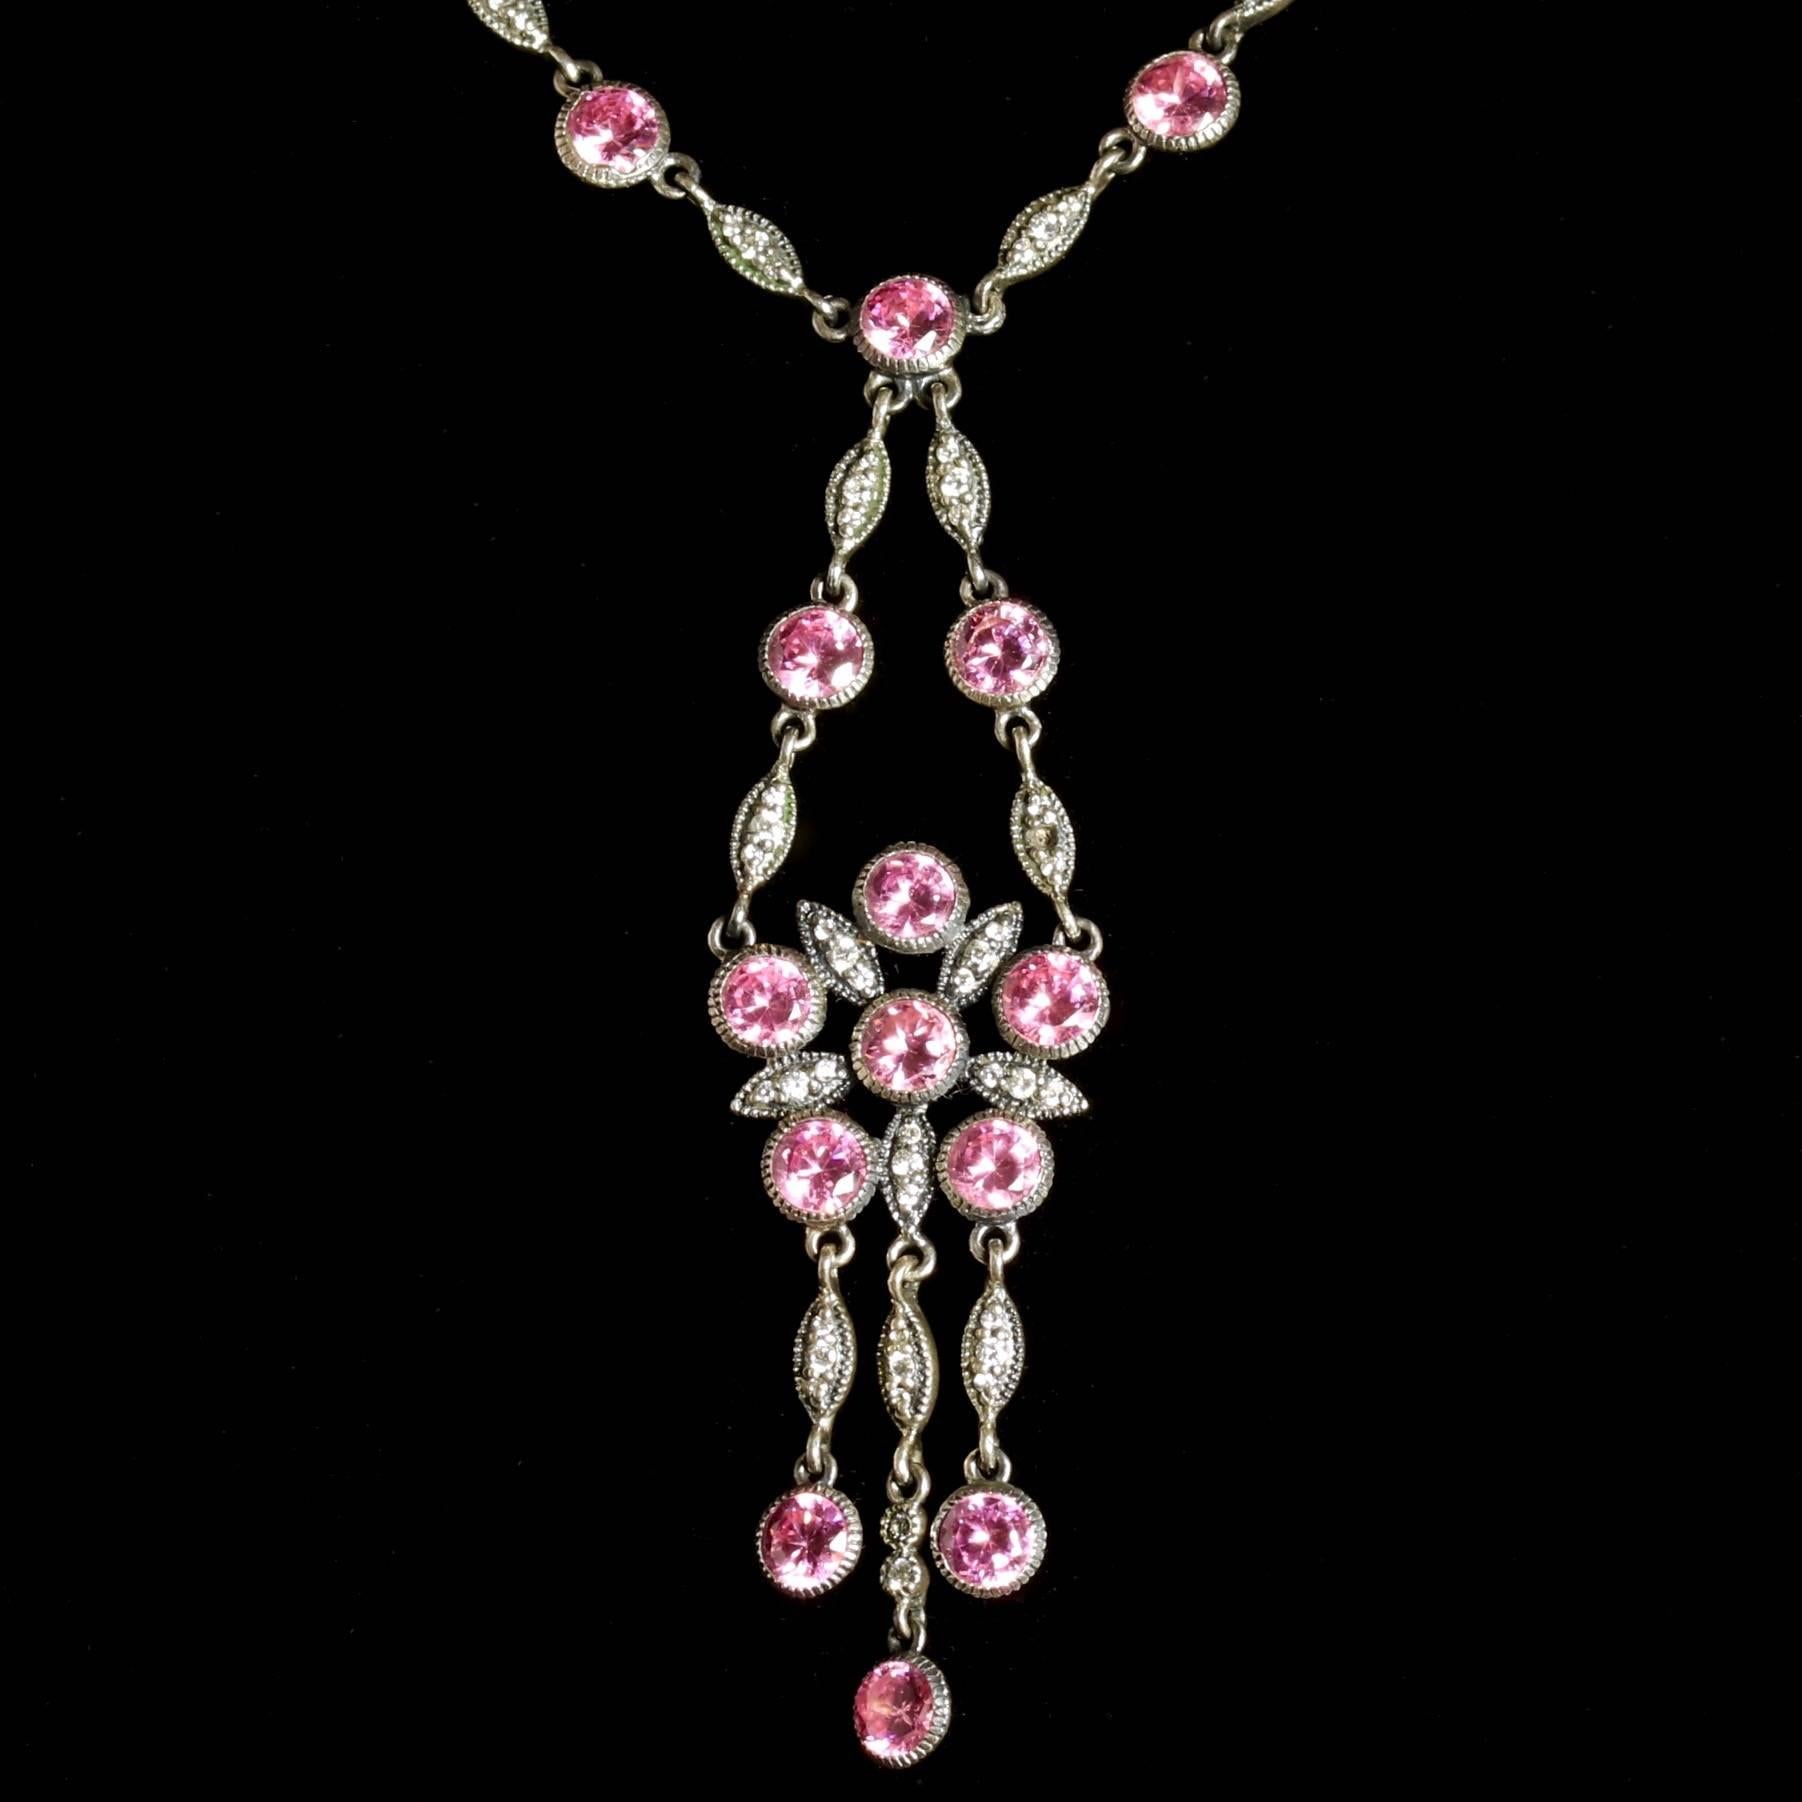 This fabulous Sterling Silver Victorian Paste pendant necklace is Circa 1900.

Lovely old cut Paste stones adorn this fabulous necklace, featuring lovely Pink Pastes and also White which sparkle just like Diamonds.

Paste is hand-cut glass that has